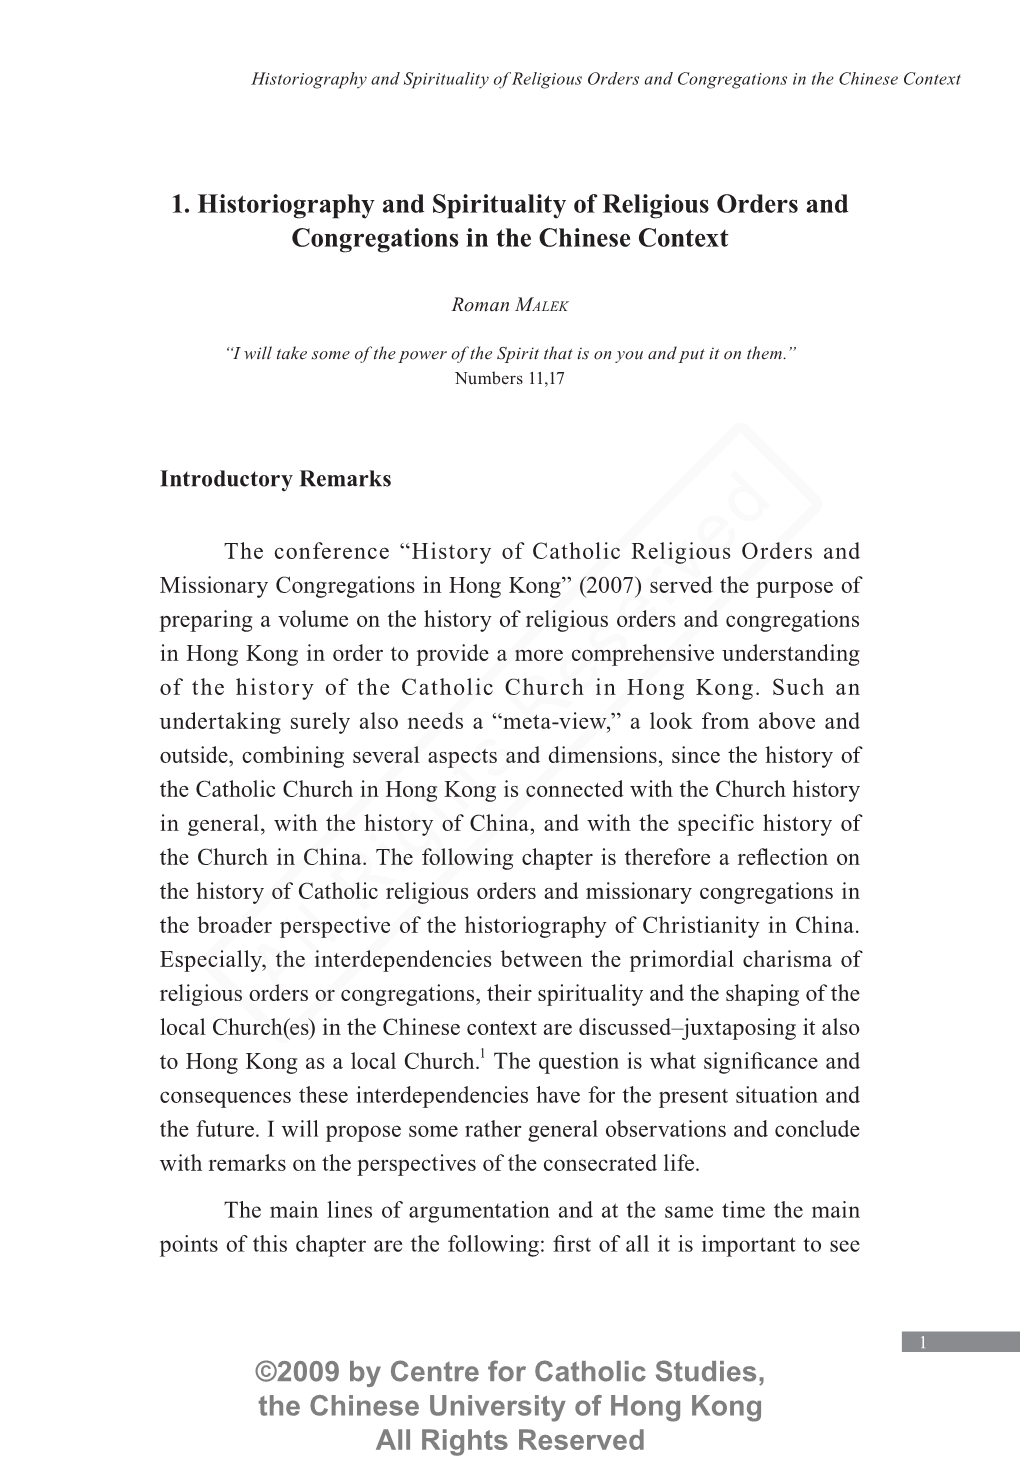 1. Historiography and Spirituality of Religious Orders and Congregations in the Chinese Context